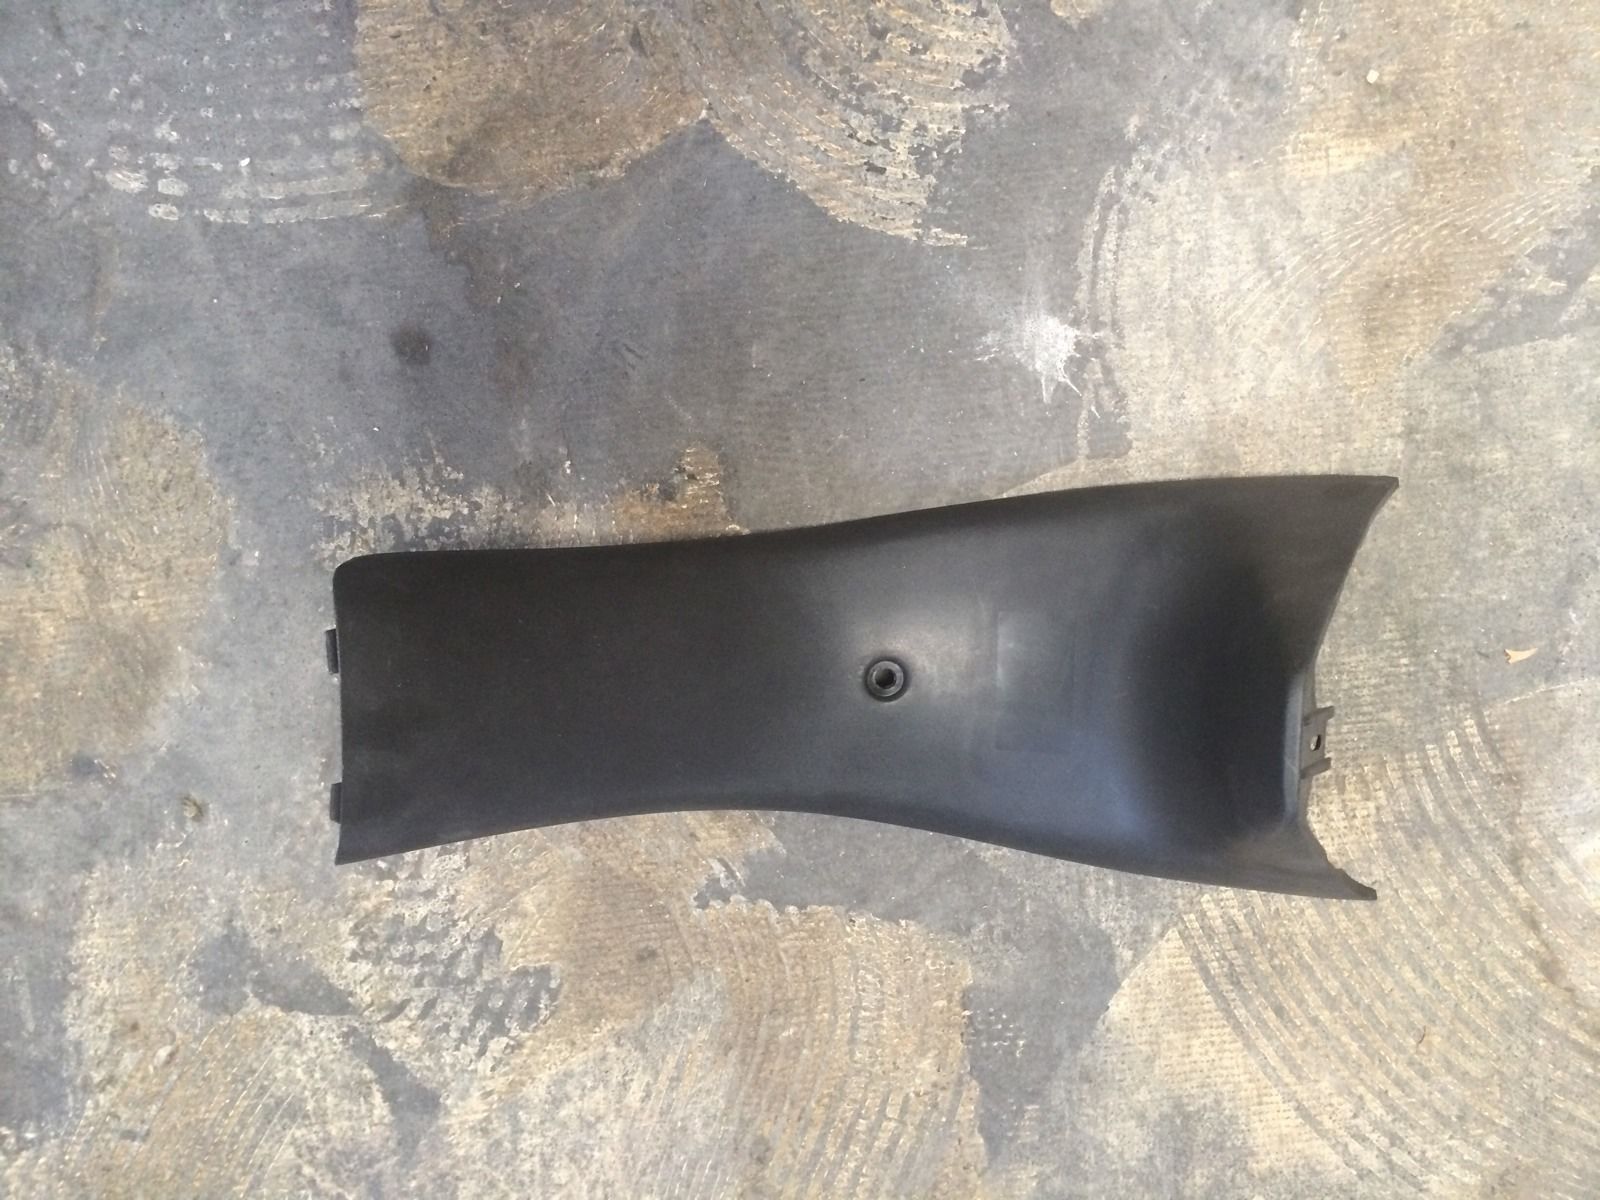 1987 HONDA CH150 ELITE 150 SCOOTER Battery Cover S